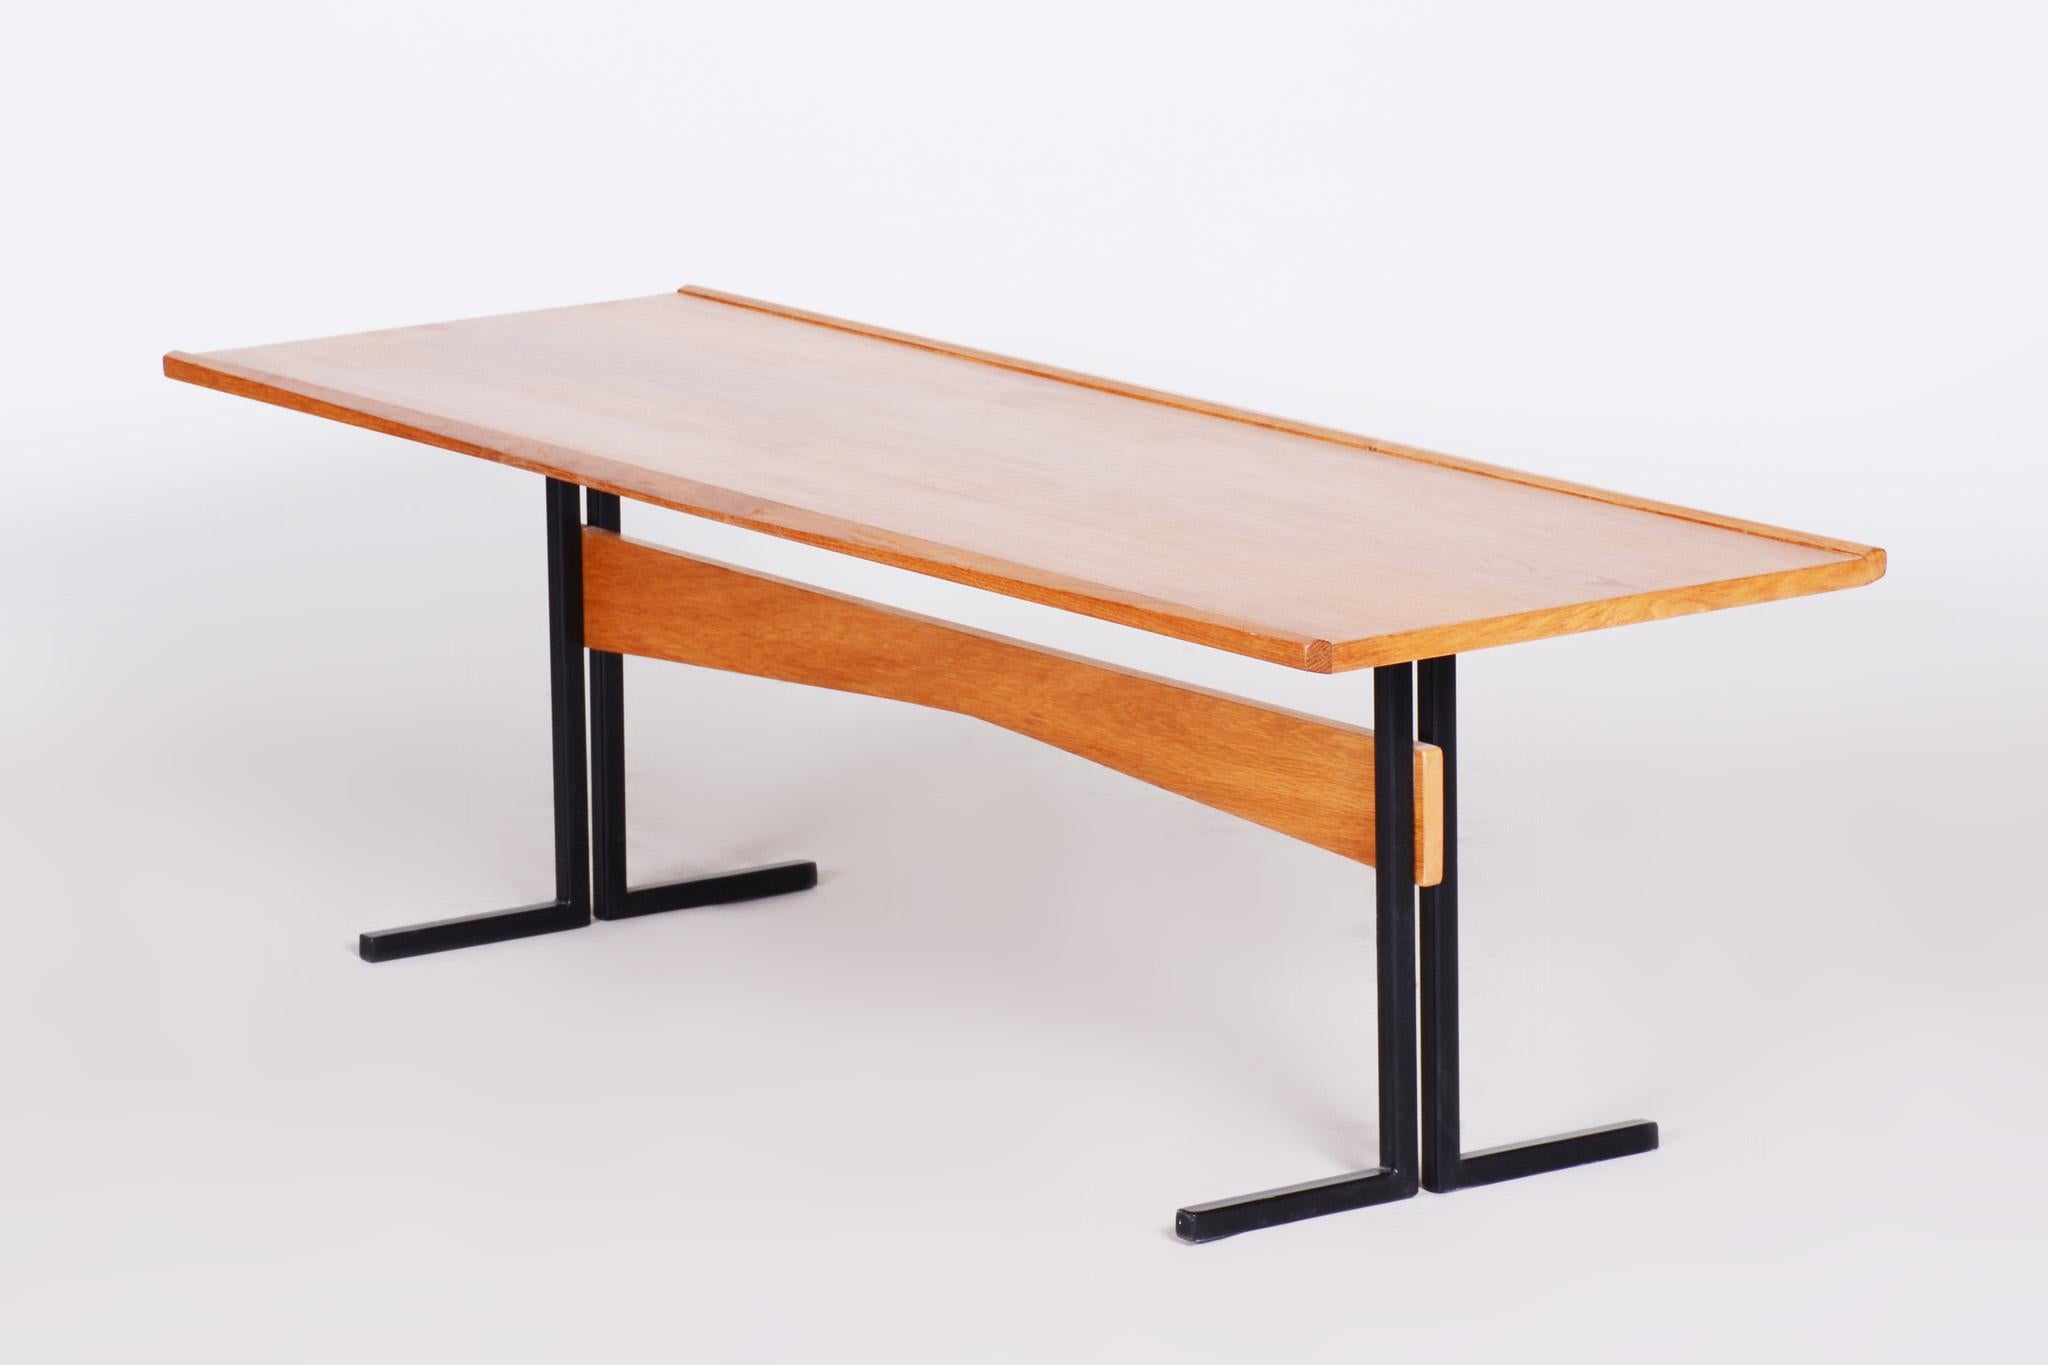 Mid-20th Century Original Rectangular Ash and Steel Table, Czech Mid-Century Modern, 1960s For Sale